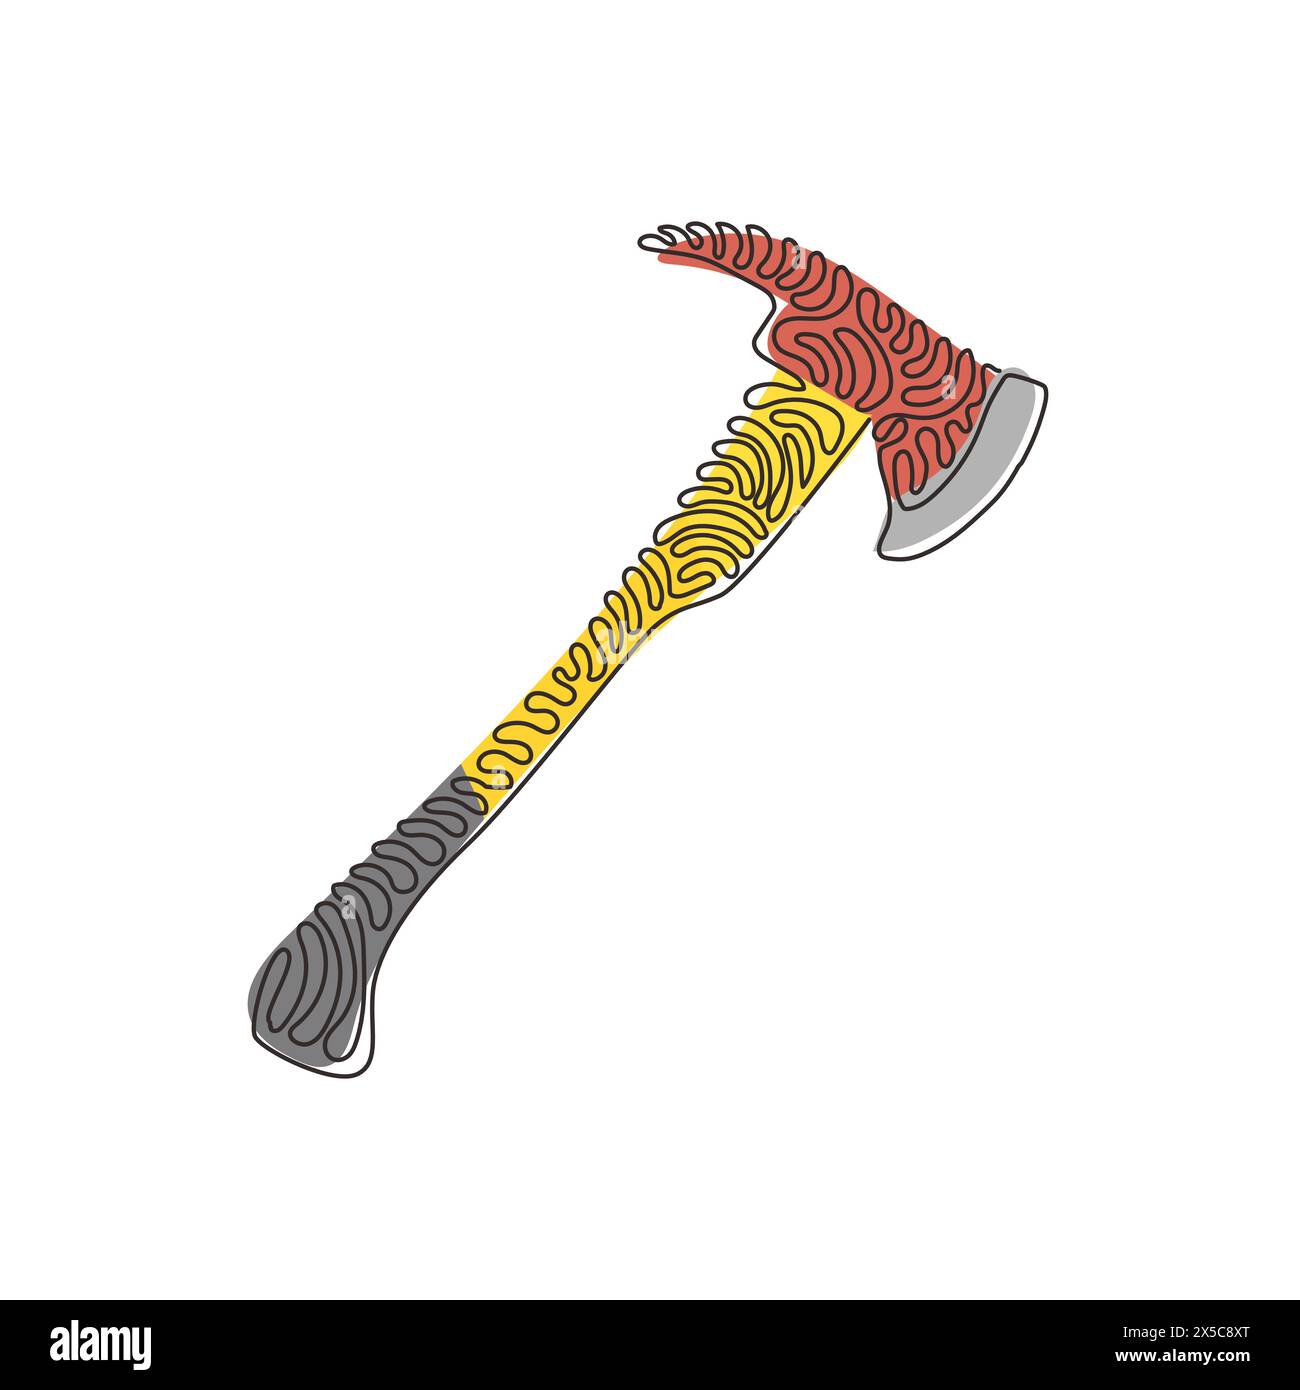 Single one line drawing red fire axe icon. Firefighter ax. Fire extinguishing equipment. Professional tool and instrument. Swirl curl style. Continuou Stock Vector